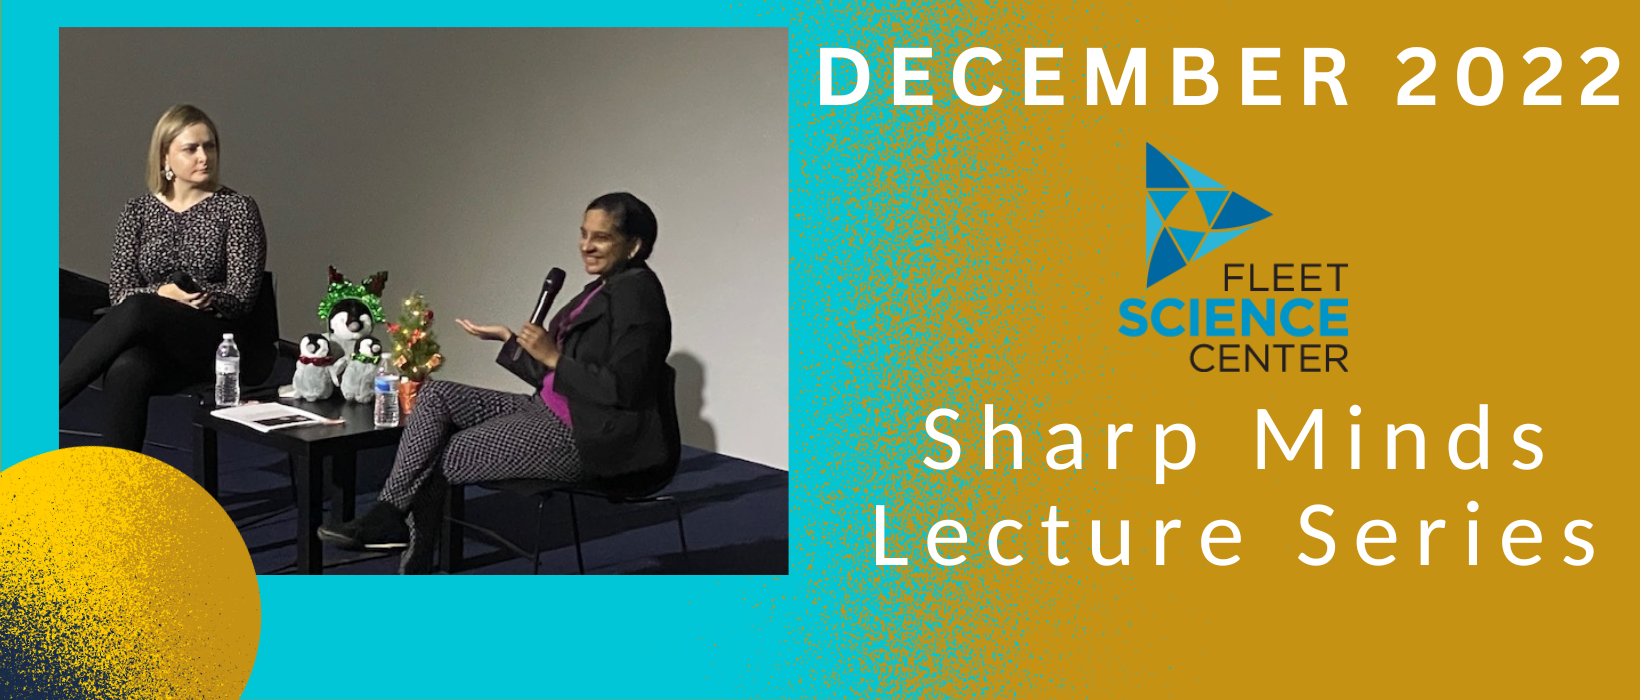 7 of 7, Ramya Rajagopalan and Caryn Rubanovich sit on stage at The Fleet Science Center presenting the 2022 December Sharp Minds Lecture